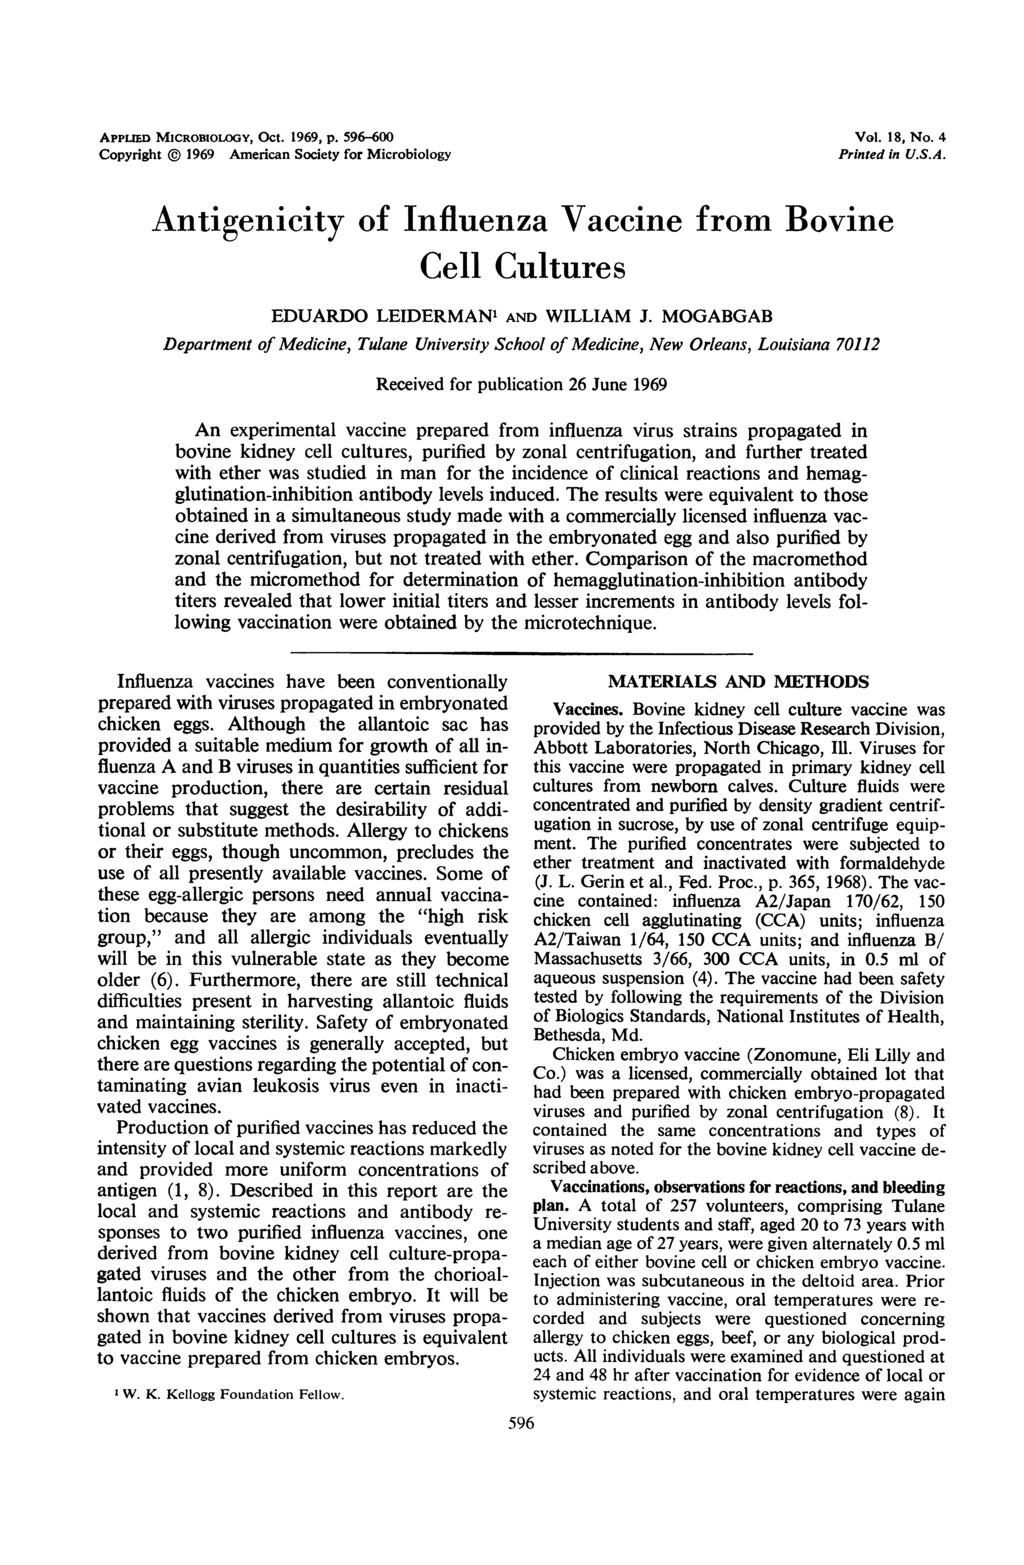 APPLIED MICROBIOLOGY, Oct. 1969, p. 596-600 Copyright 1969 American Society for Microbiology Vol. 18, No. 4 Printed in U.S.A. Antigenicity of Influenza Vaccine from Bovine Cell Cultures EDUARDO LEIDERMAN1 AND WILLIAM J.